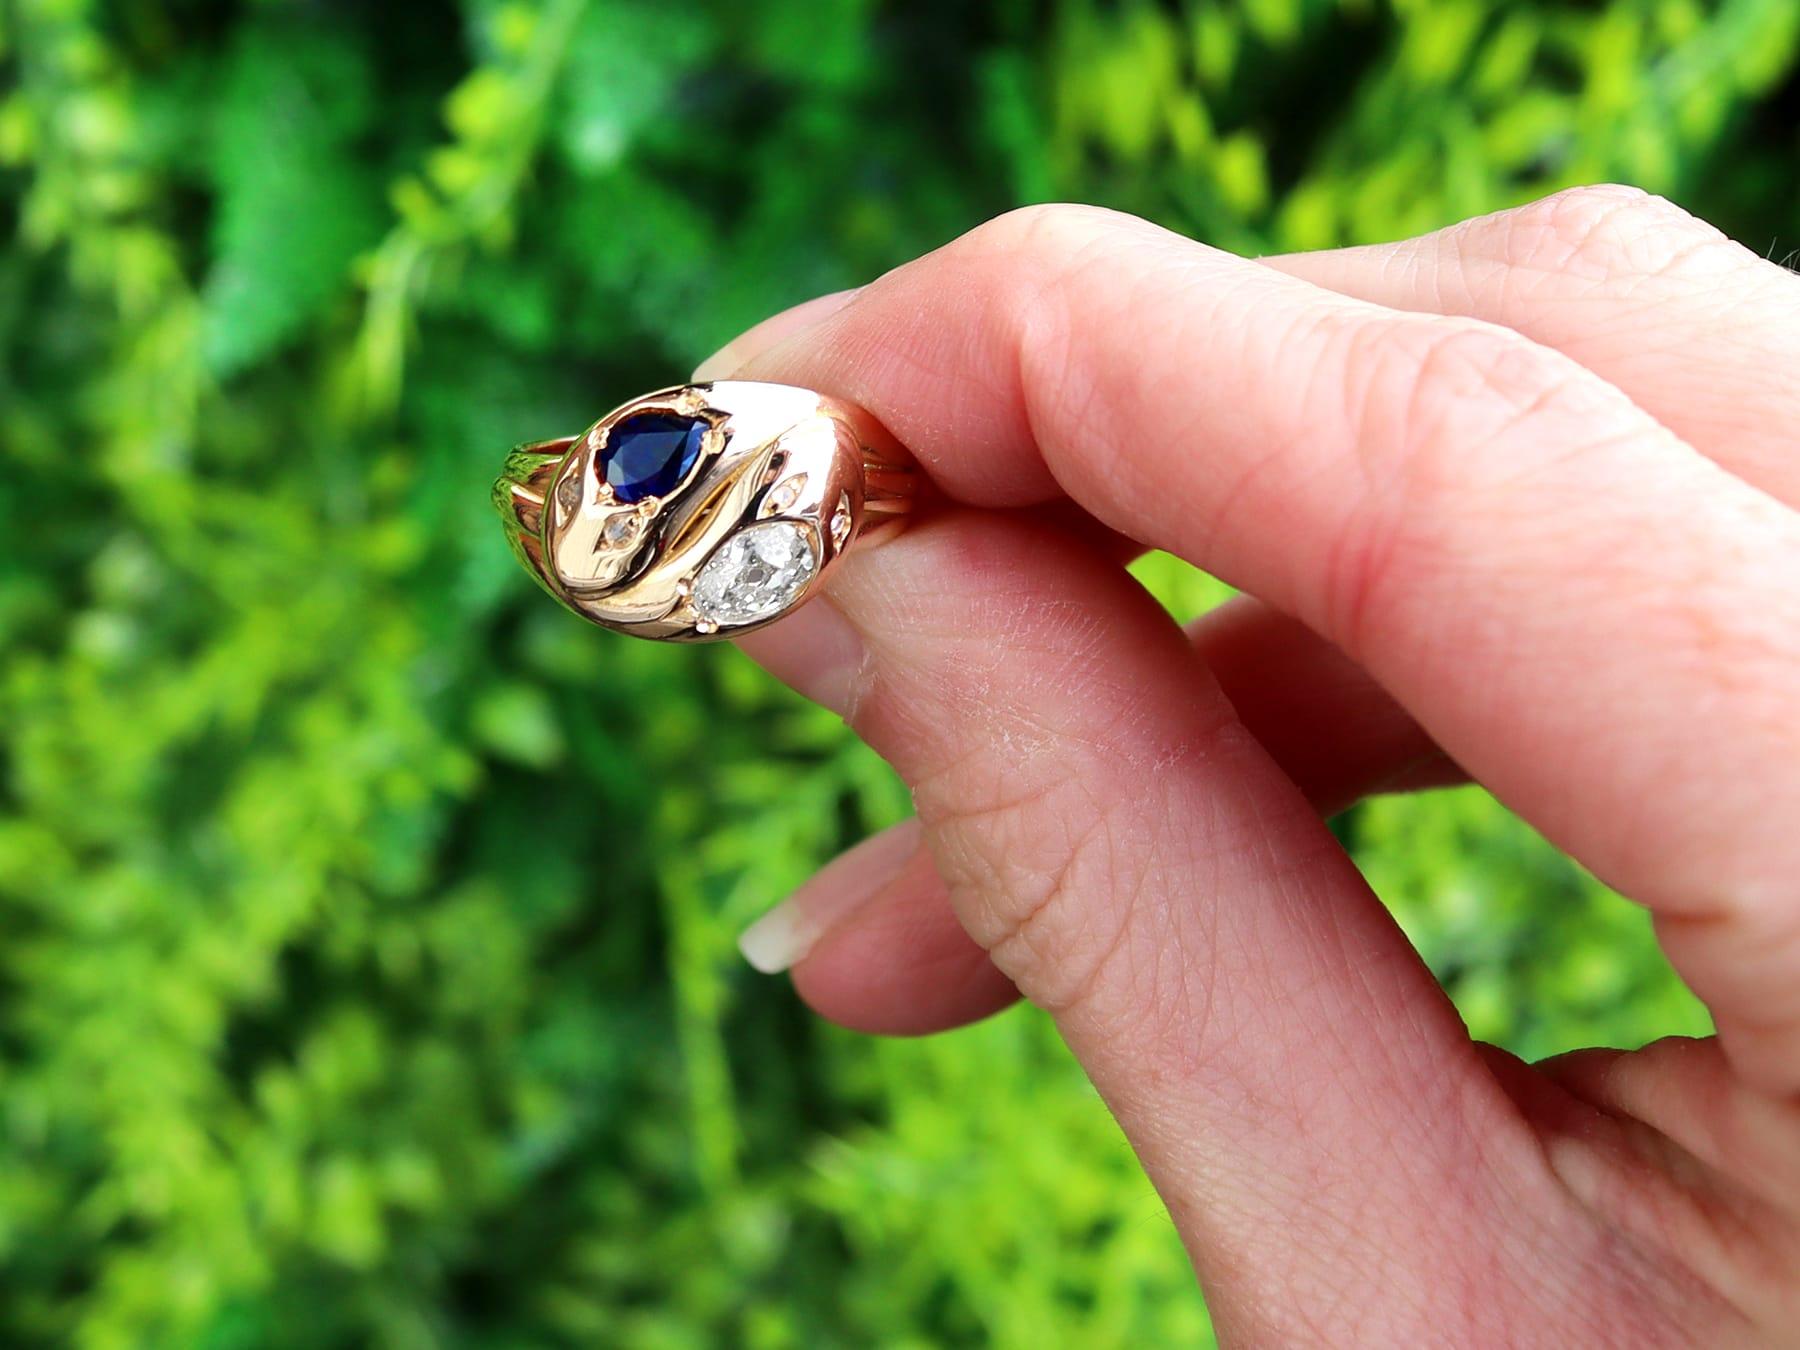 A stunning, fine and impressive antique 0.63 carat sapphire and 0.77 carat diamond, 18 carat yellow gold snake ring; part of our diverse antique jewellery collections

This stunning, fine and impressive antique Victorian ring has been crafted in 18